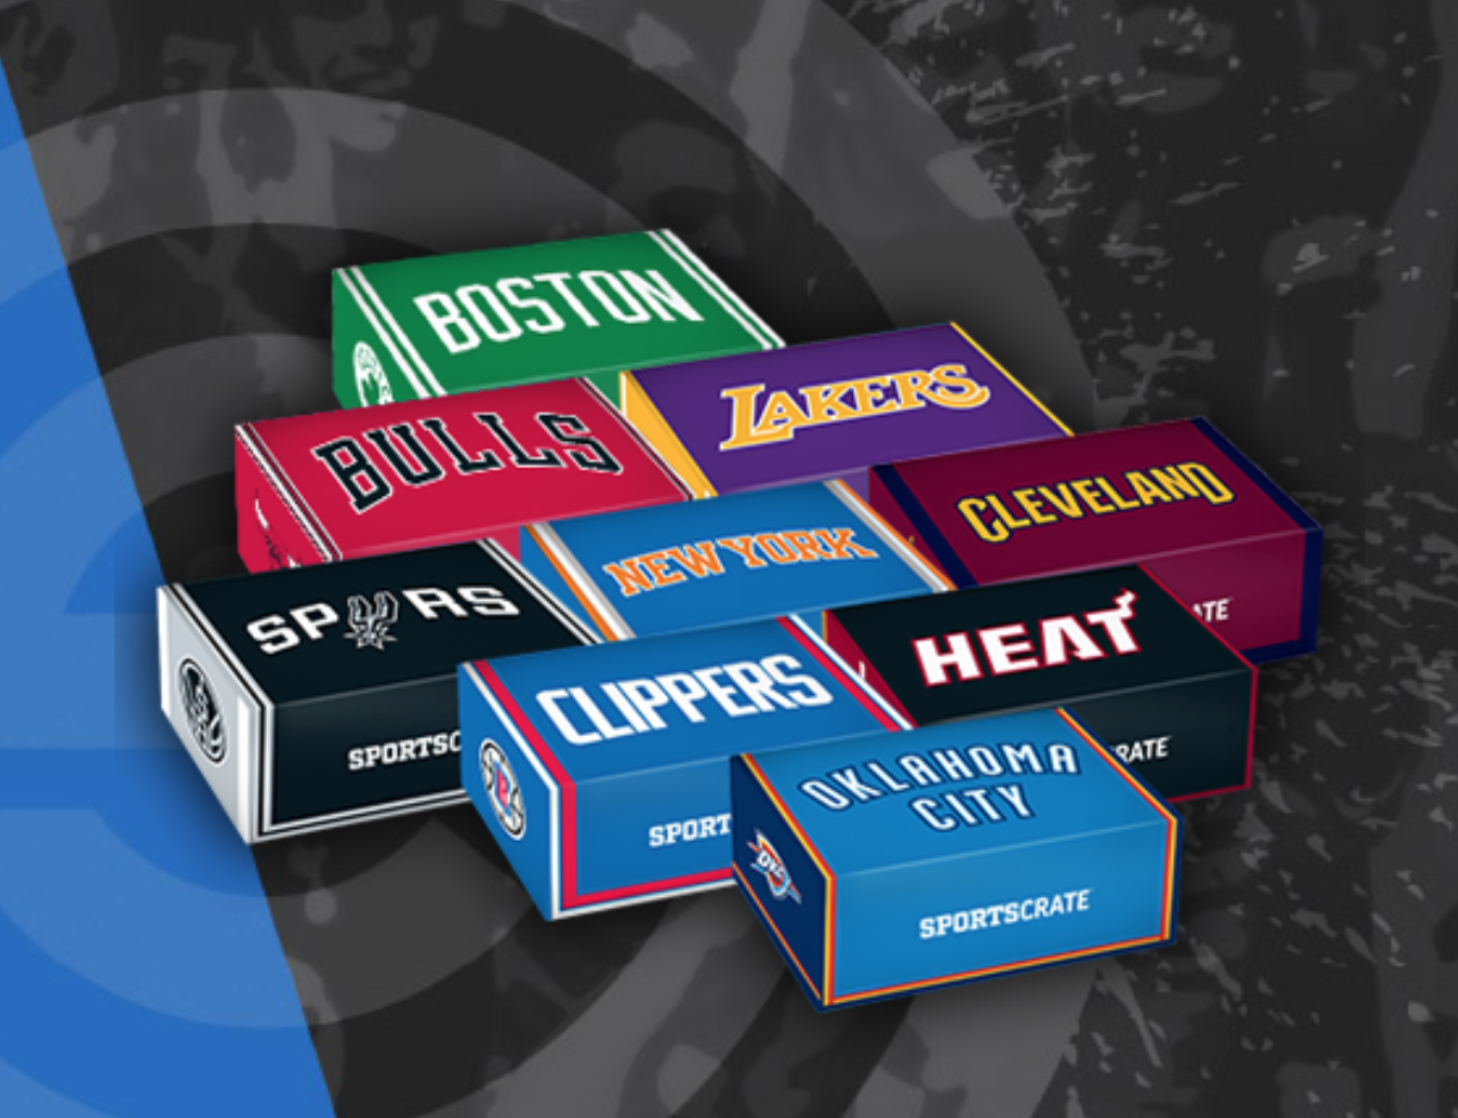 Sports Crate by Loot Crate Coupon – Save 20% Off First Box!